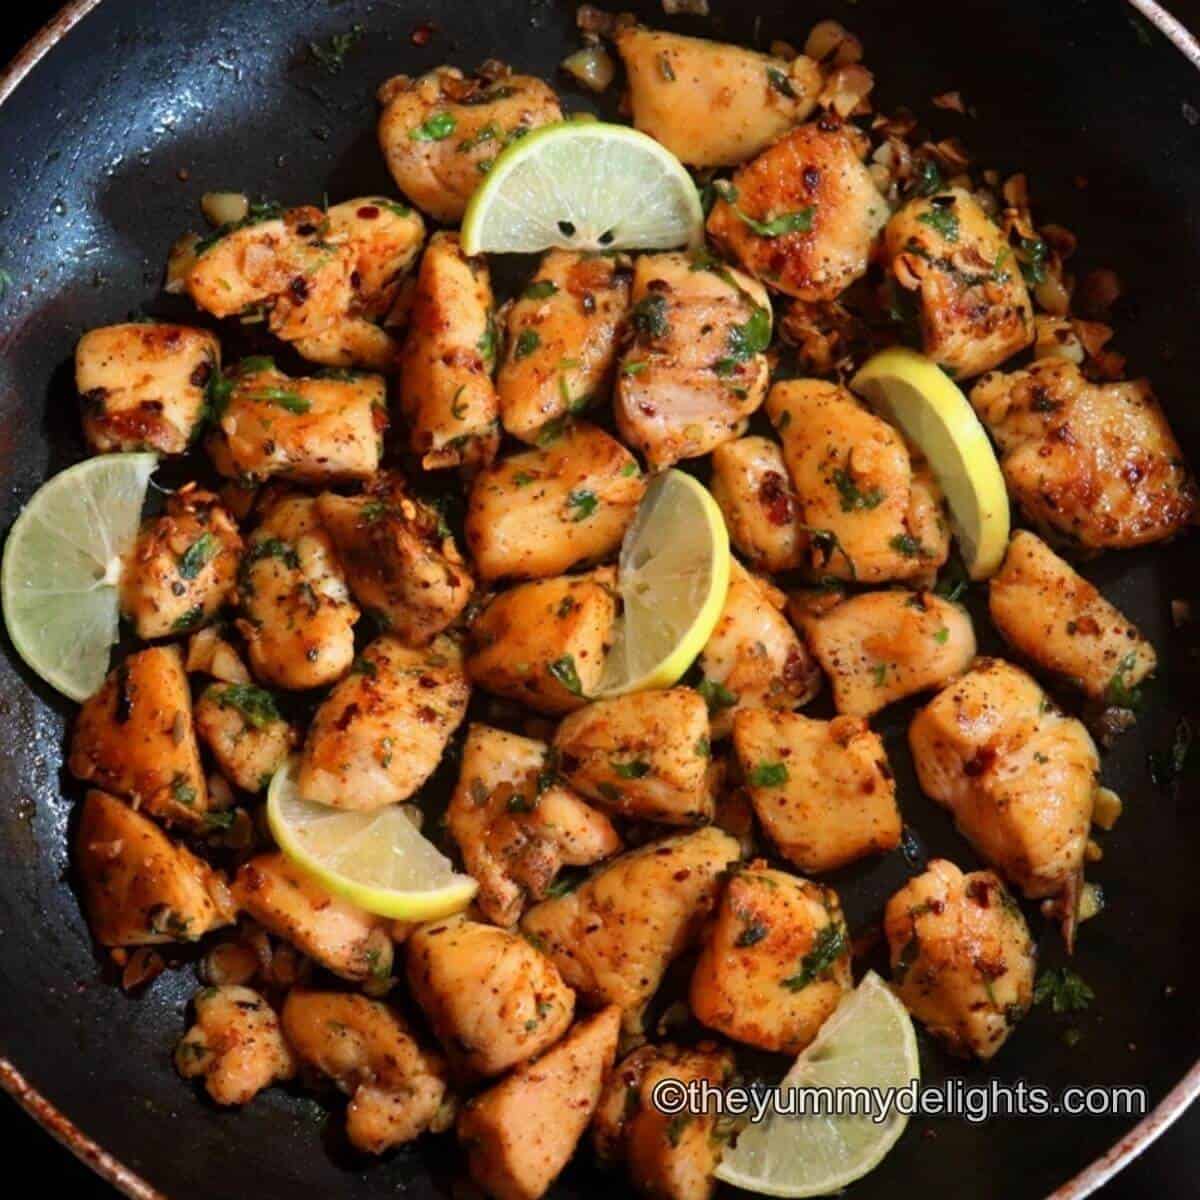 garlic butter chicken bites in a pan garnished with lemon wedges & cilantro. Close up image.